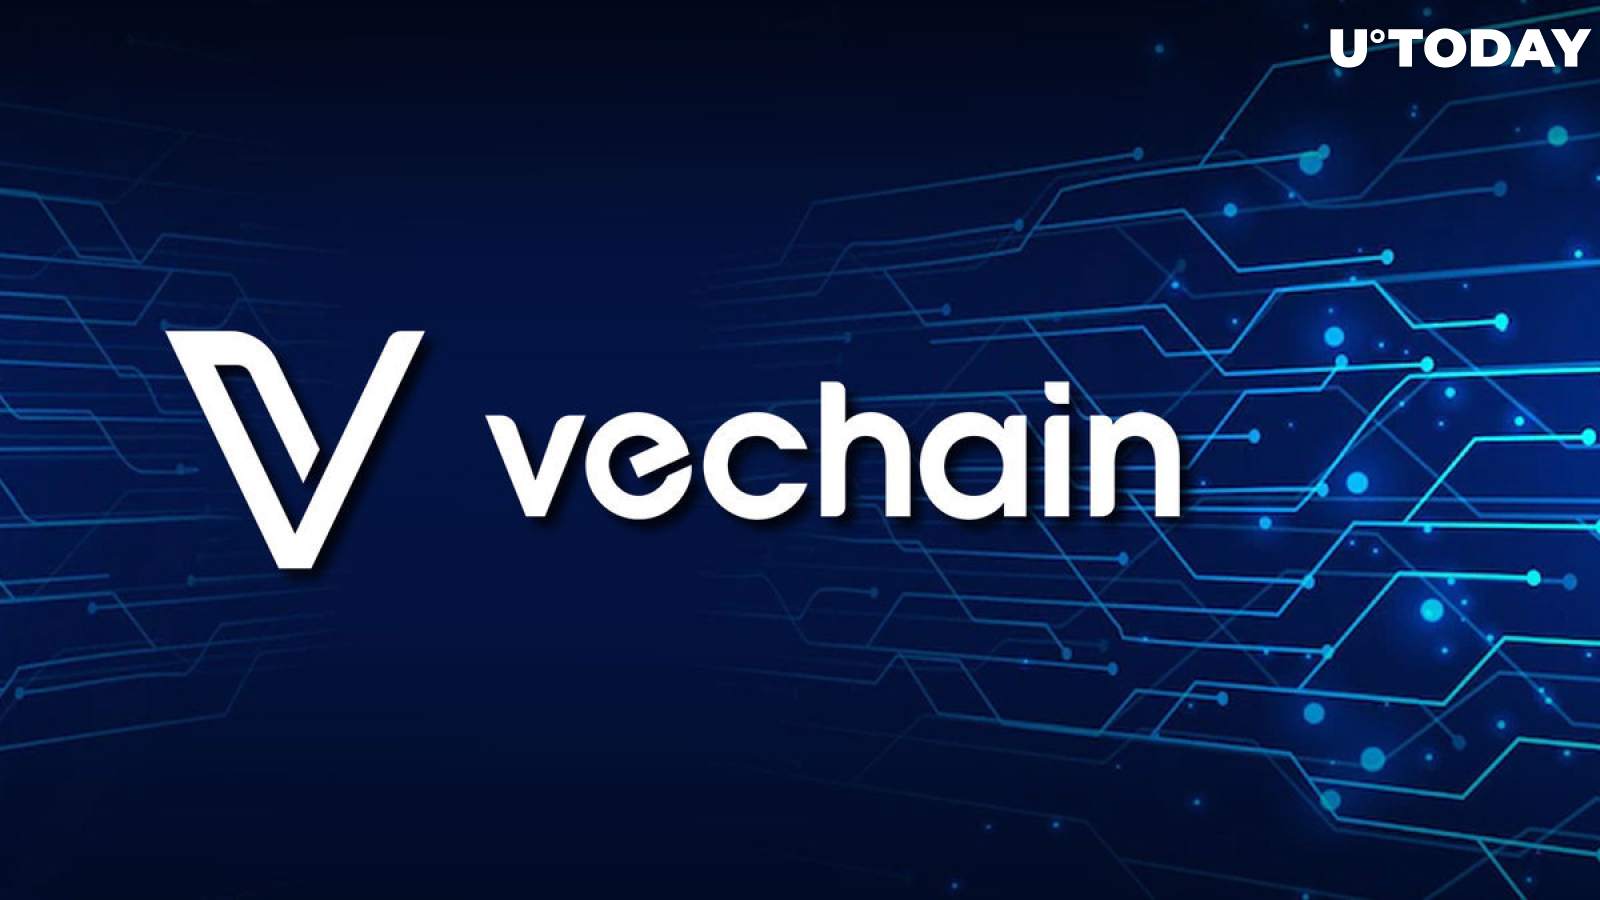 VeChain (VET) Set for New Era With Latest Whitepaper Release, Here's What's New